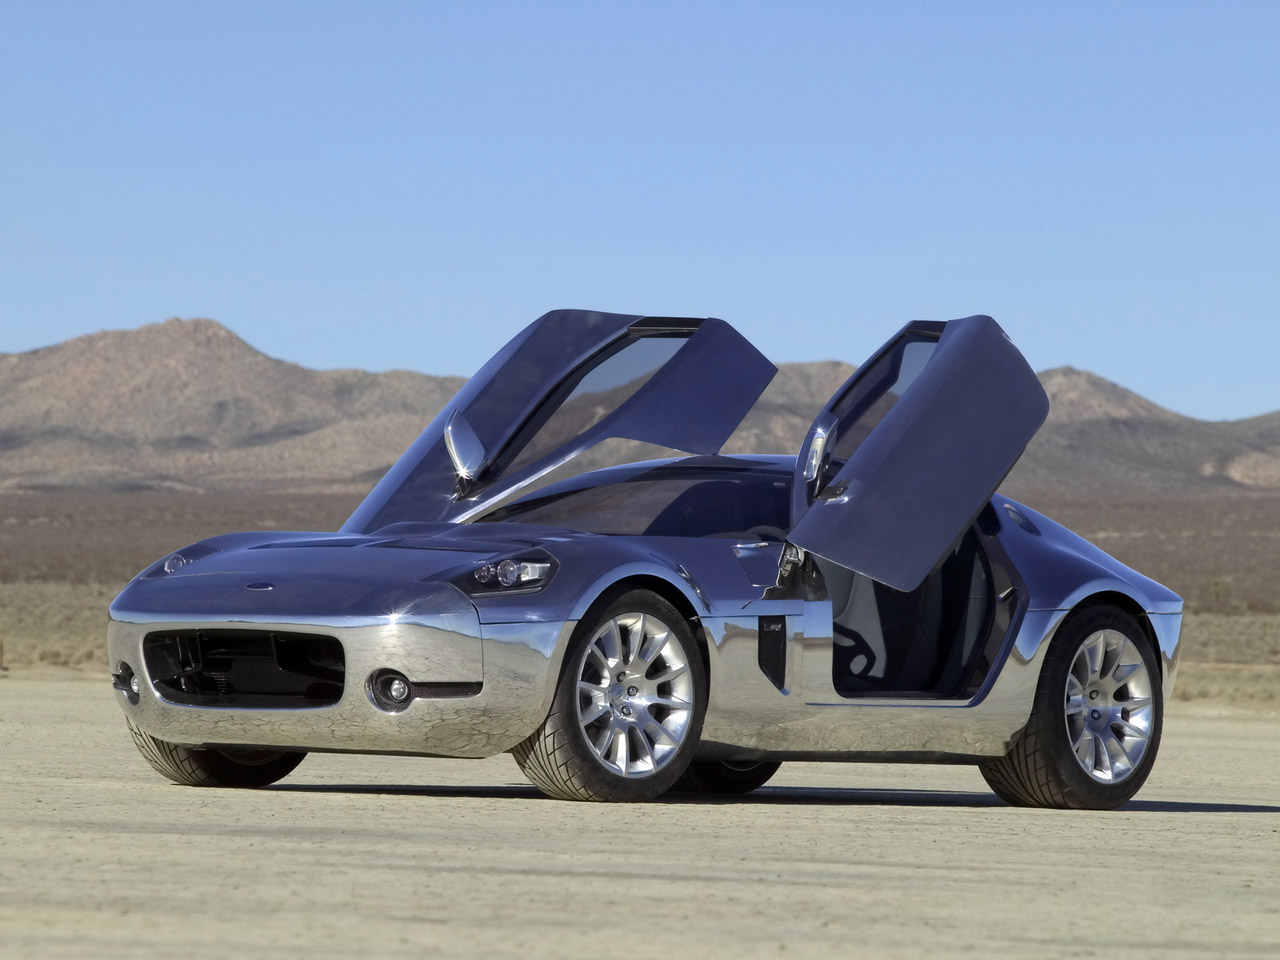 2005 Ford shelby gr1 concept with aluminum body #3